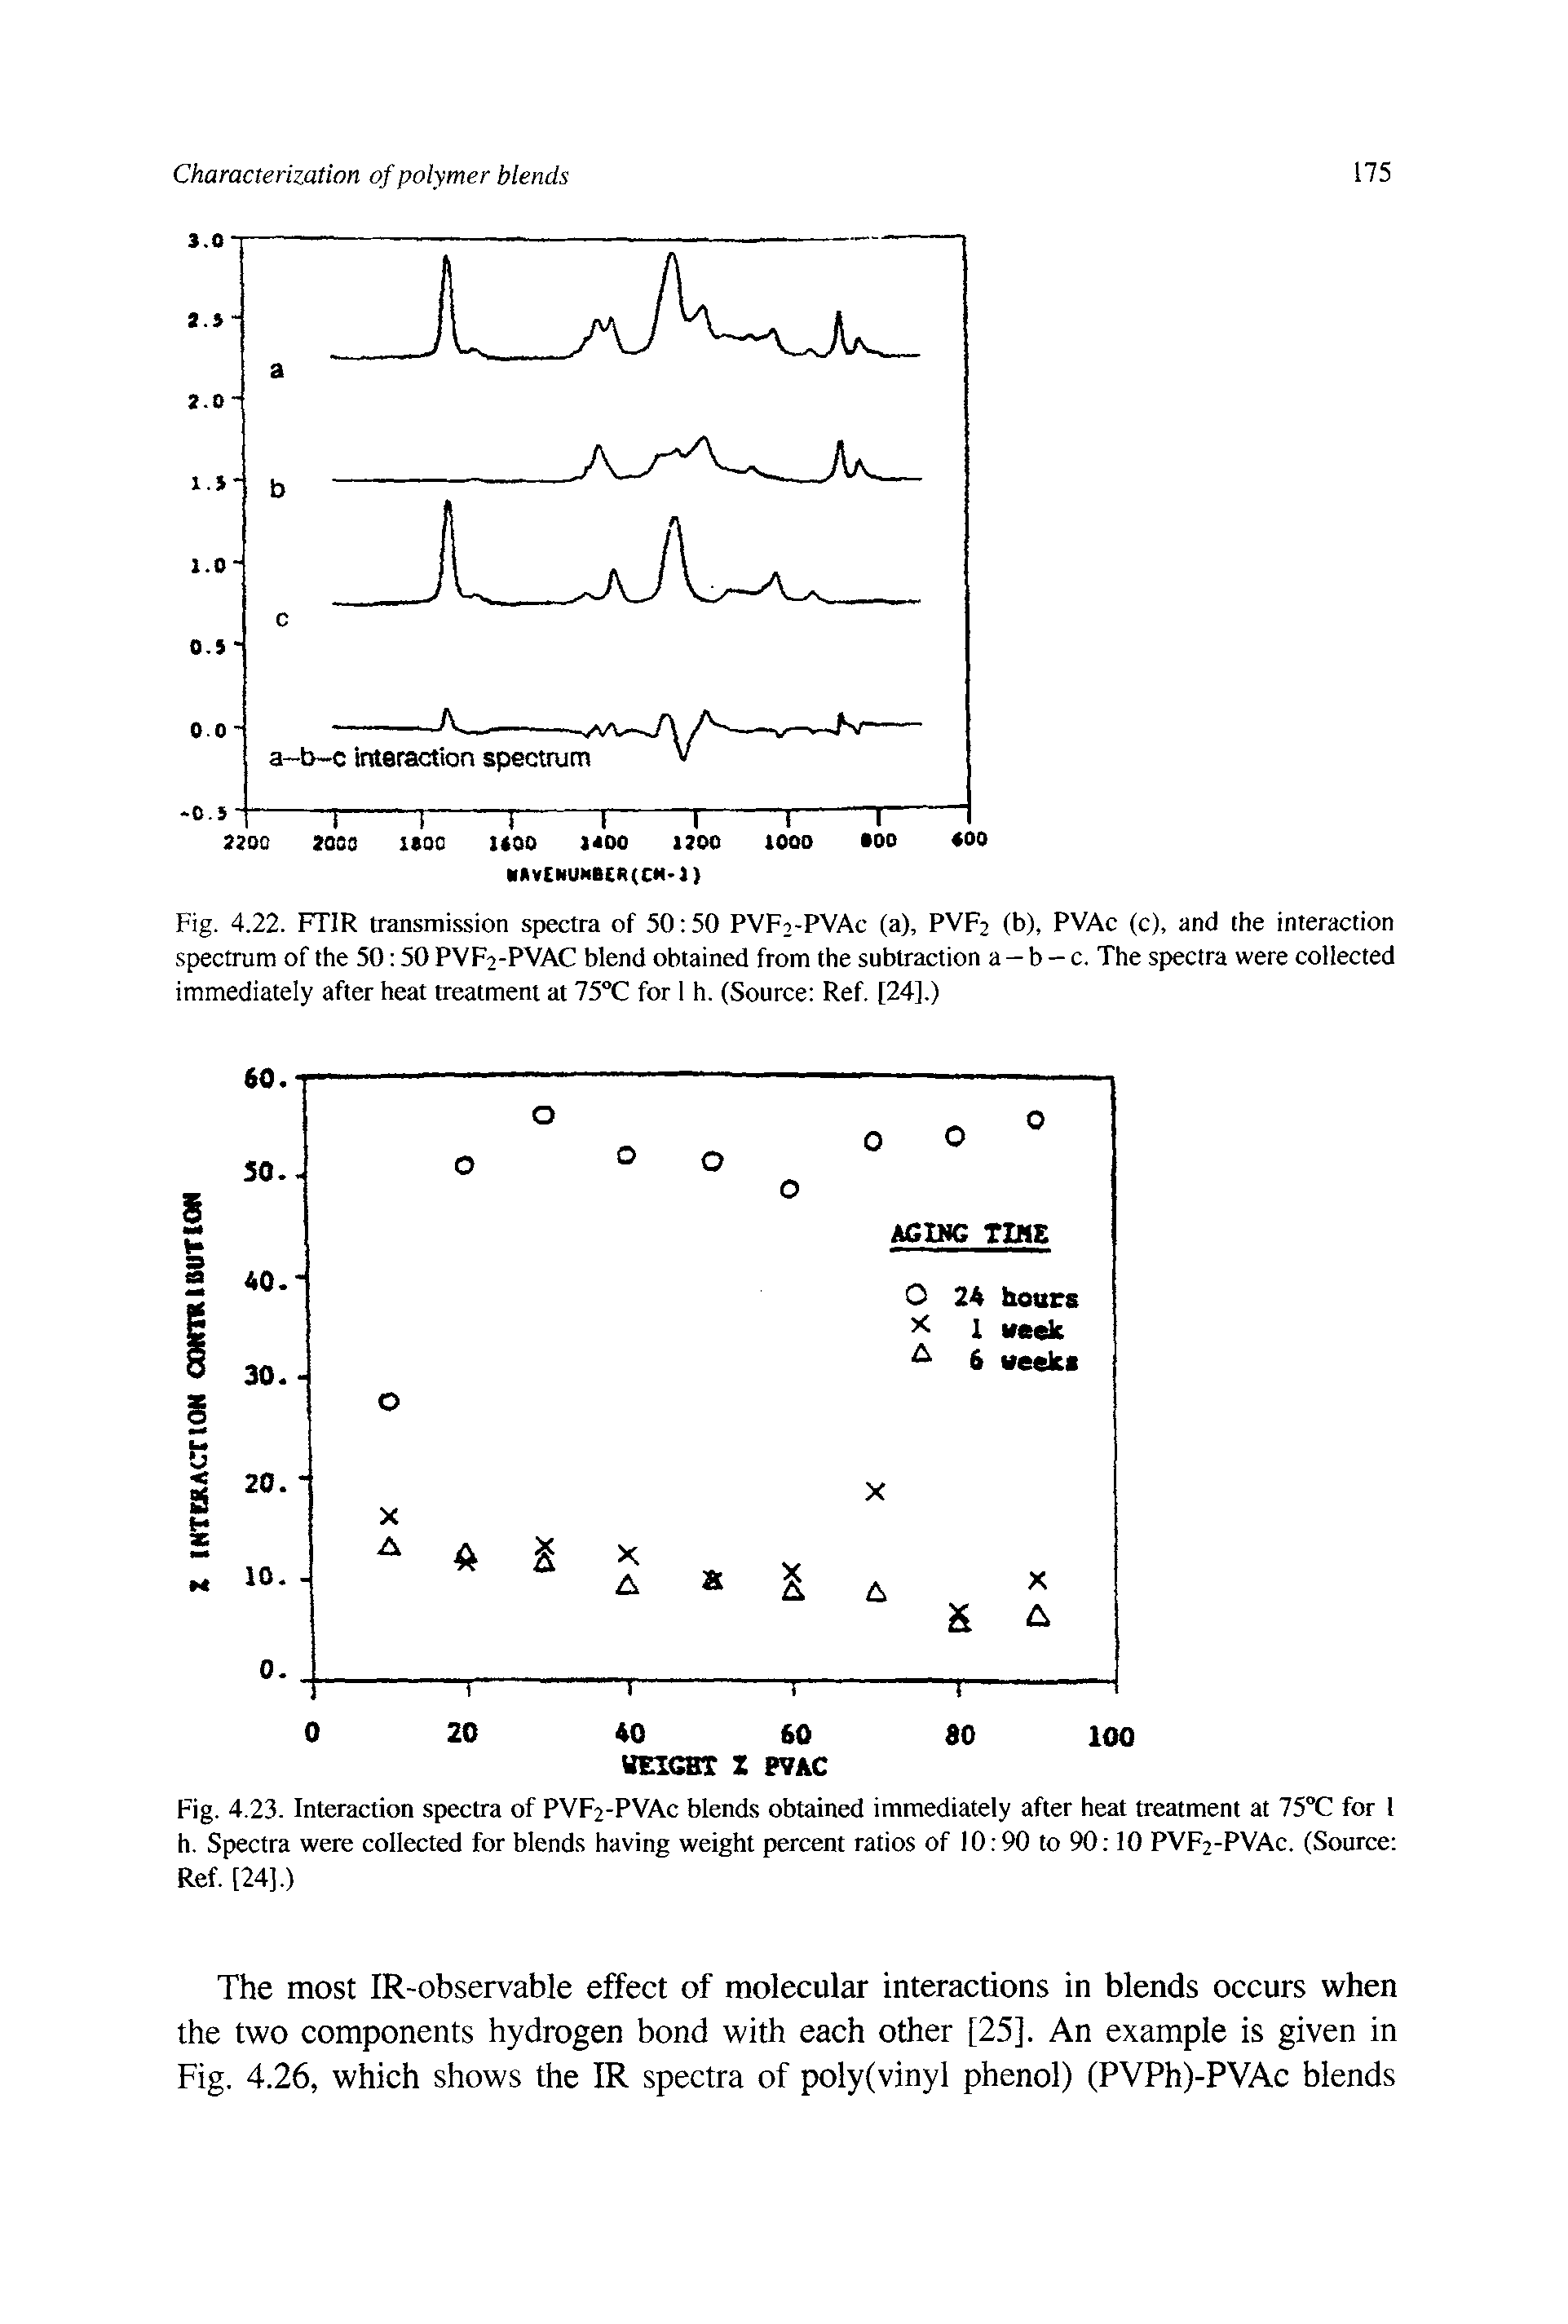 Fig. 4.22. FTIR transmission spectra of 50 50 PVFi-PVAc (a), PVF2 (b), PVAc (c), and the interaction spectrum of the 50 50 PVF2-PVAC blend obtained from the subtraction a — b - c. The spectra were collected immediately after heat treatment at 75°C for 1 h. (Source Ref. [24].)...